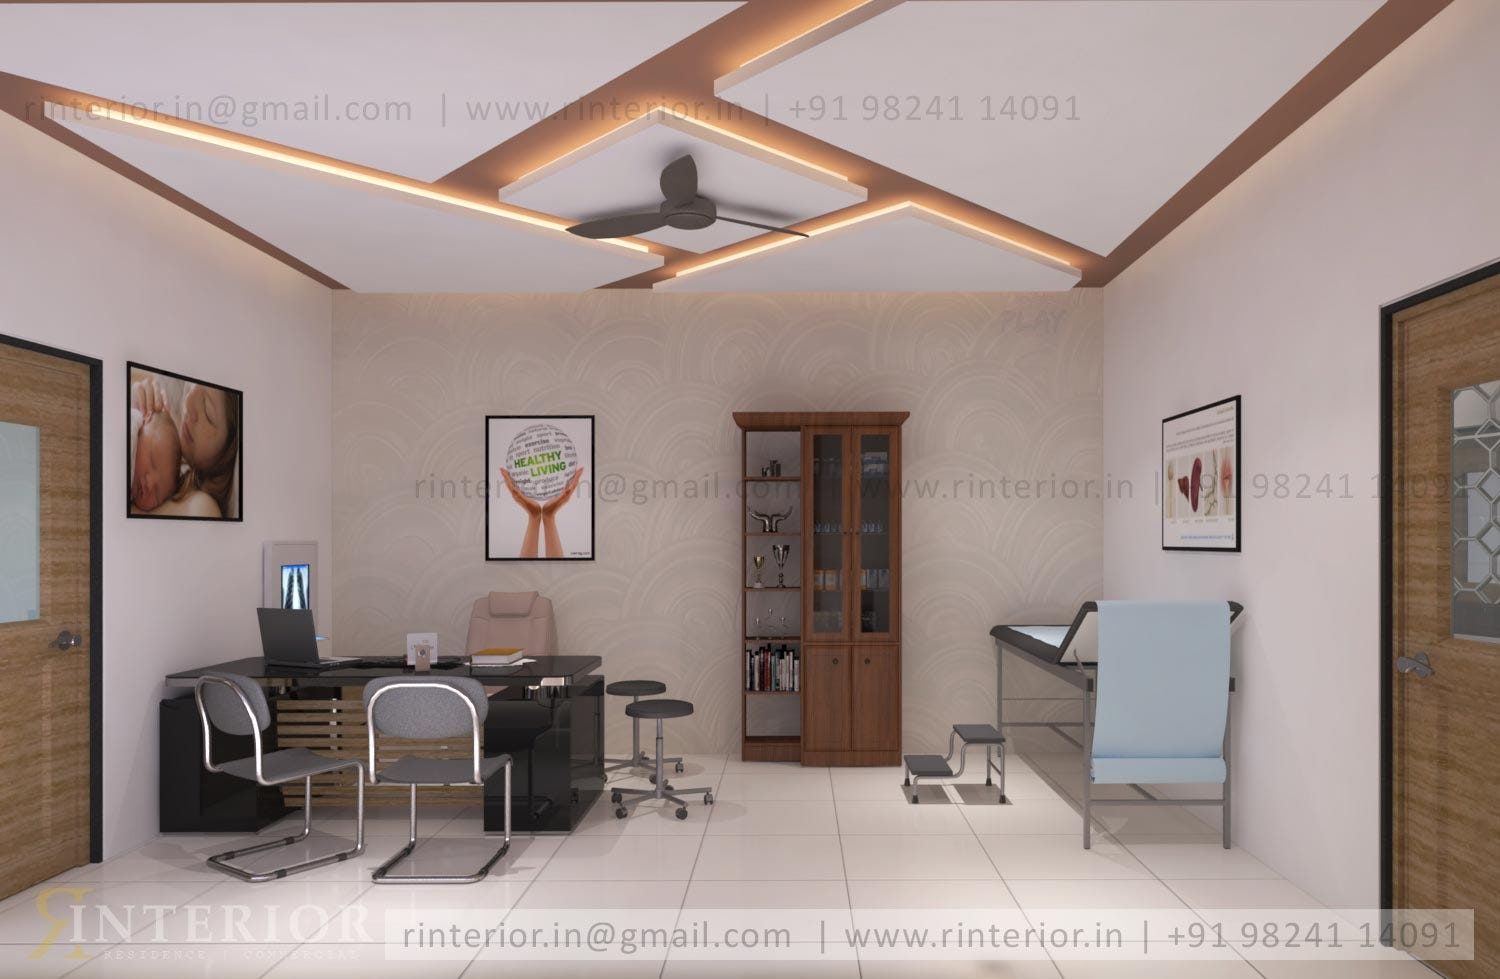 A Turnkey Interior Design Meeting Your Professional Requirements